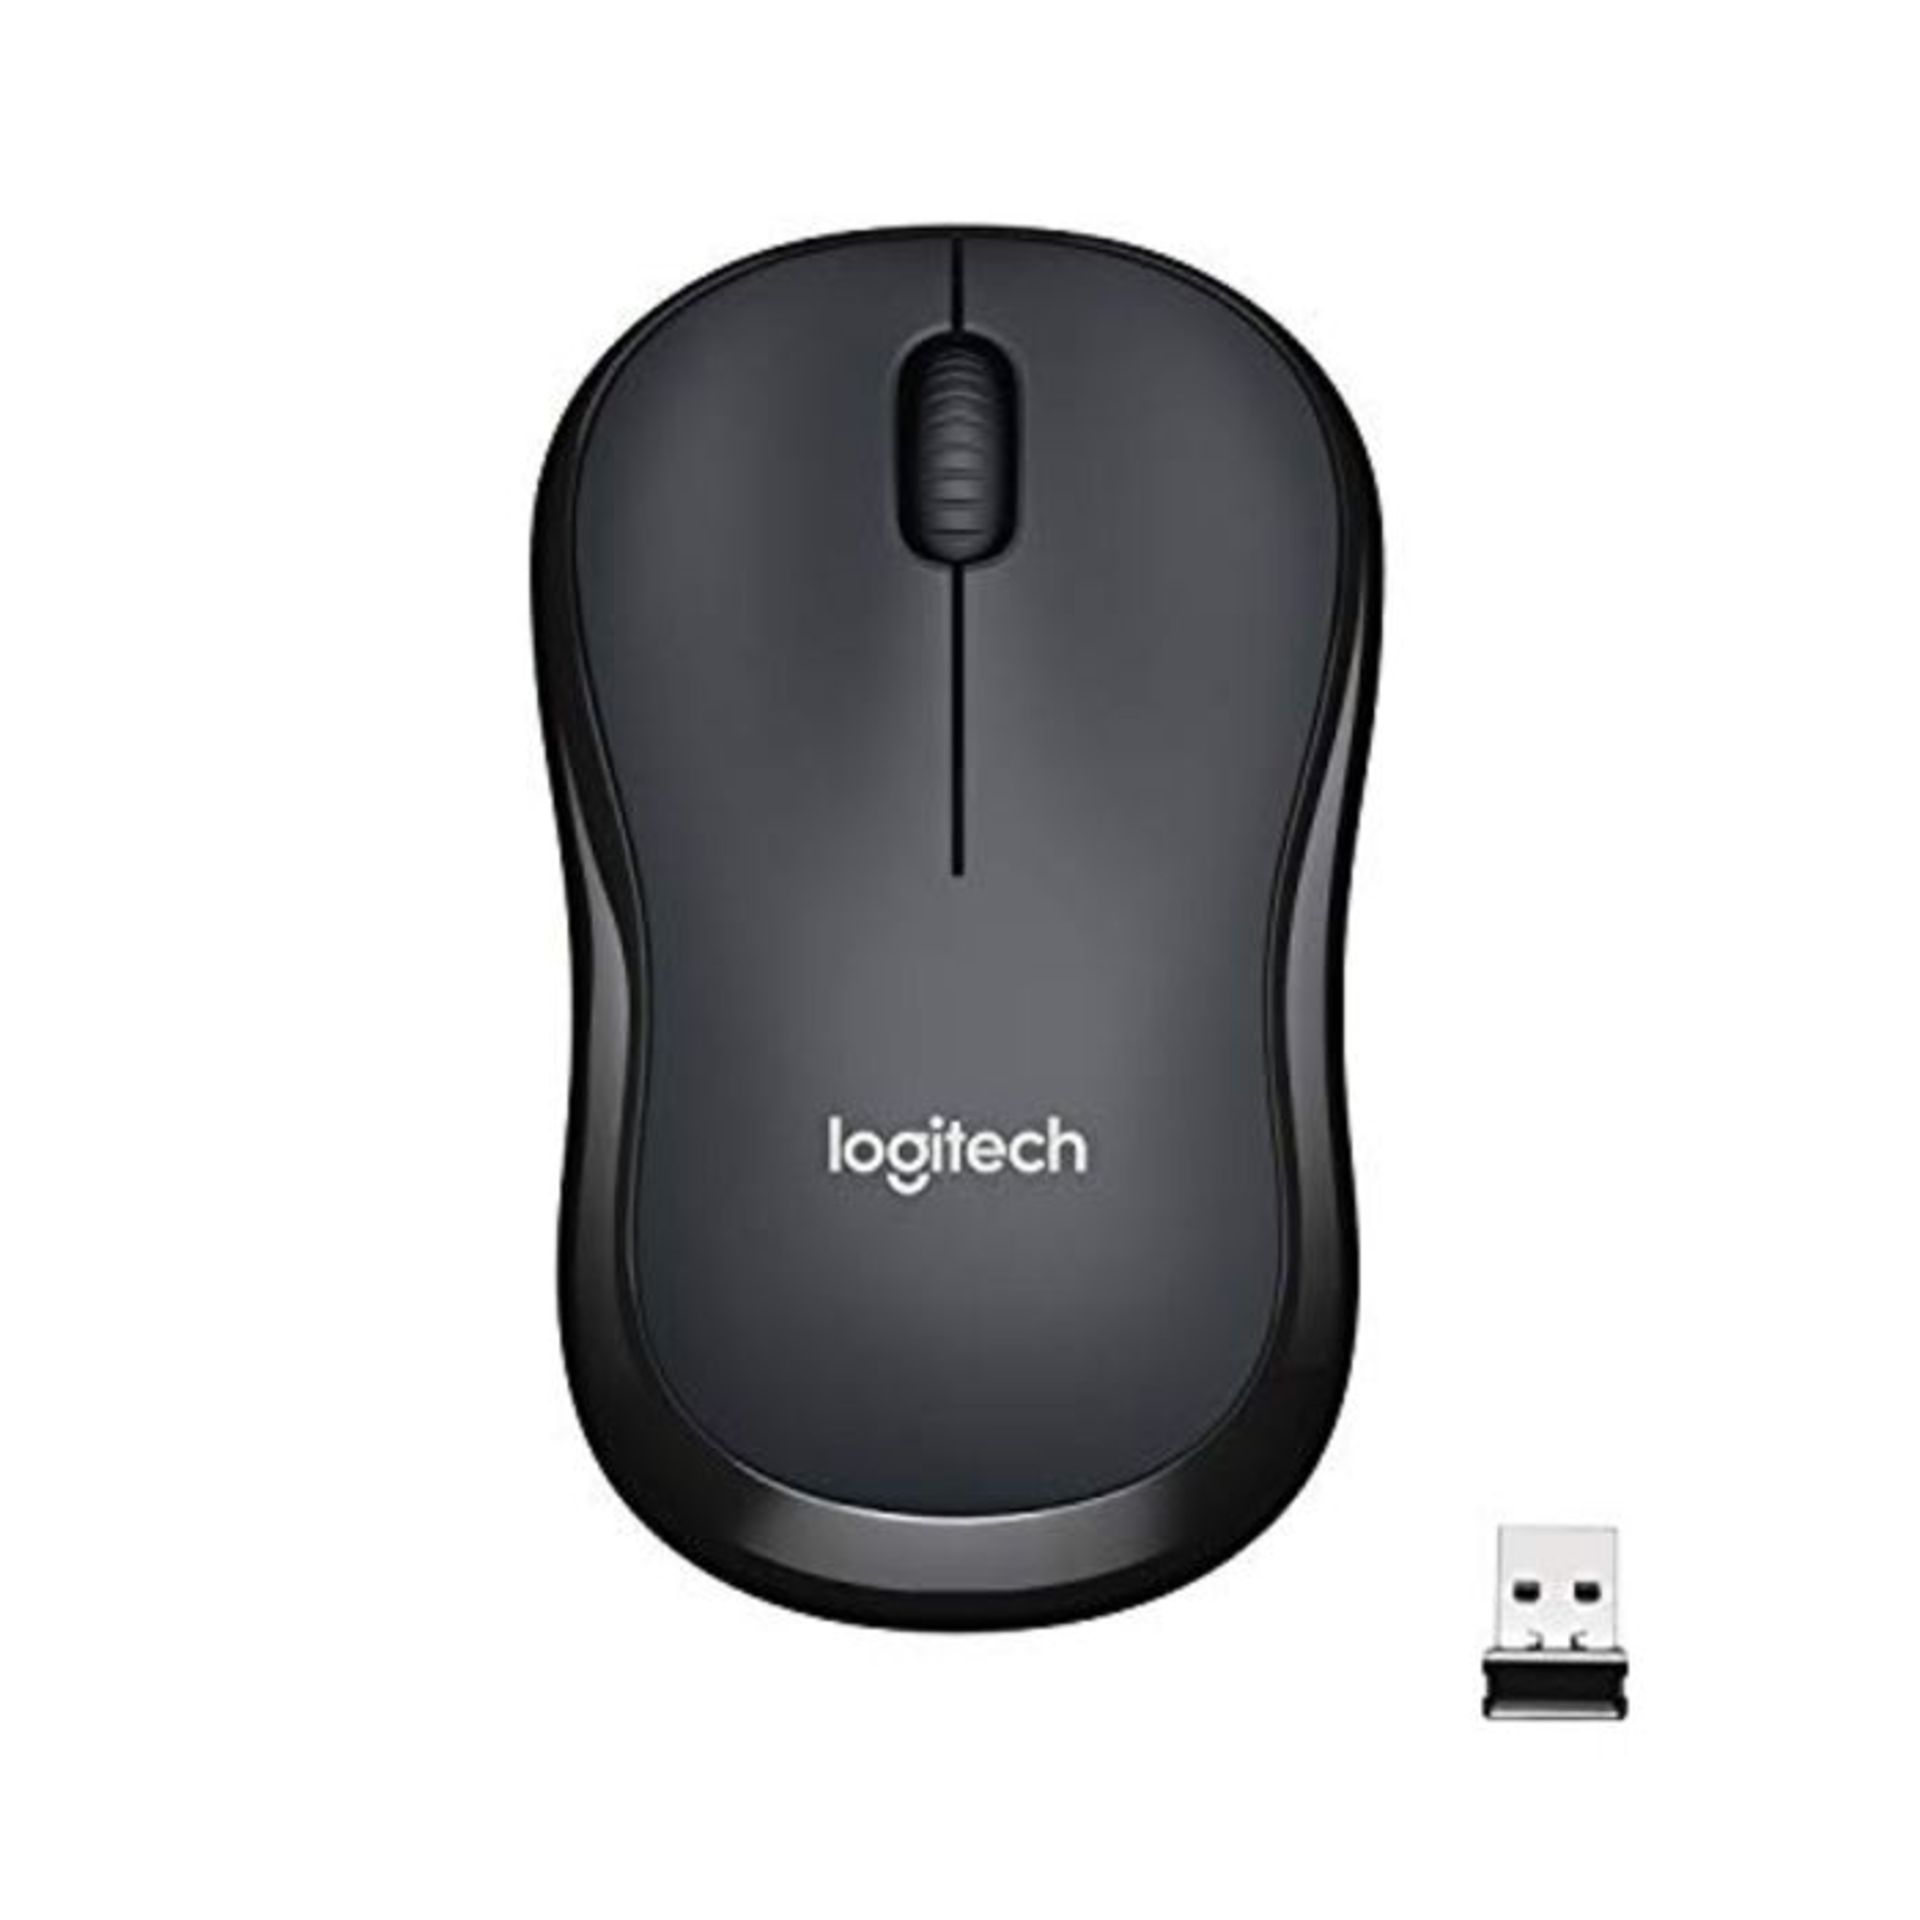 Logitech B220 Silent Wireless Mouse, 2.4GHz with Nano USB Receiver, 1000 DPI Optical T